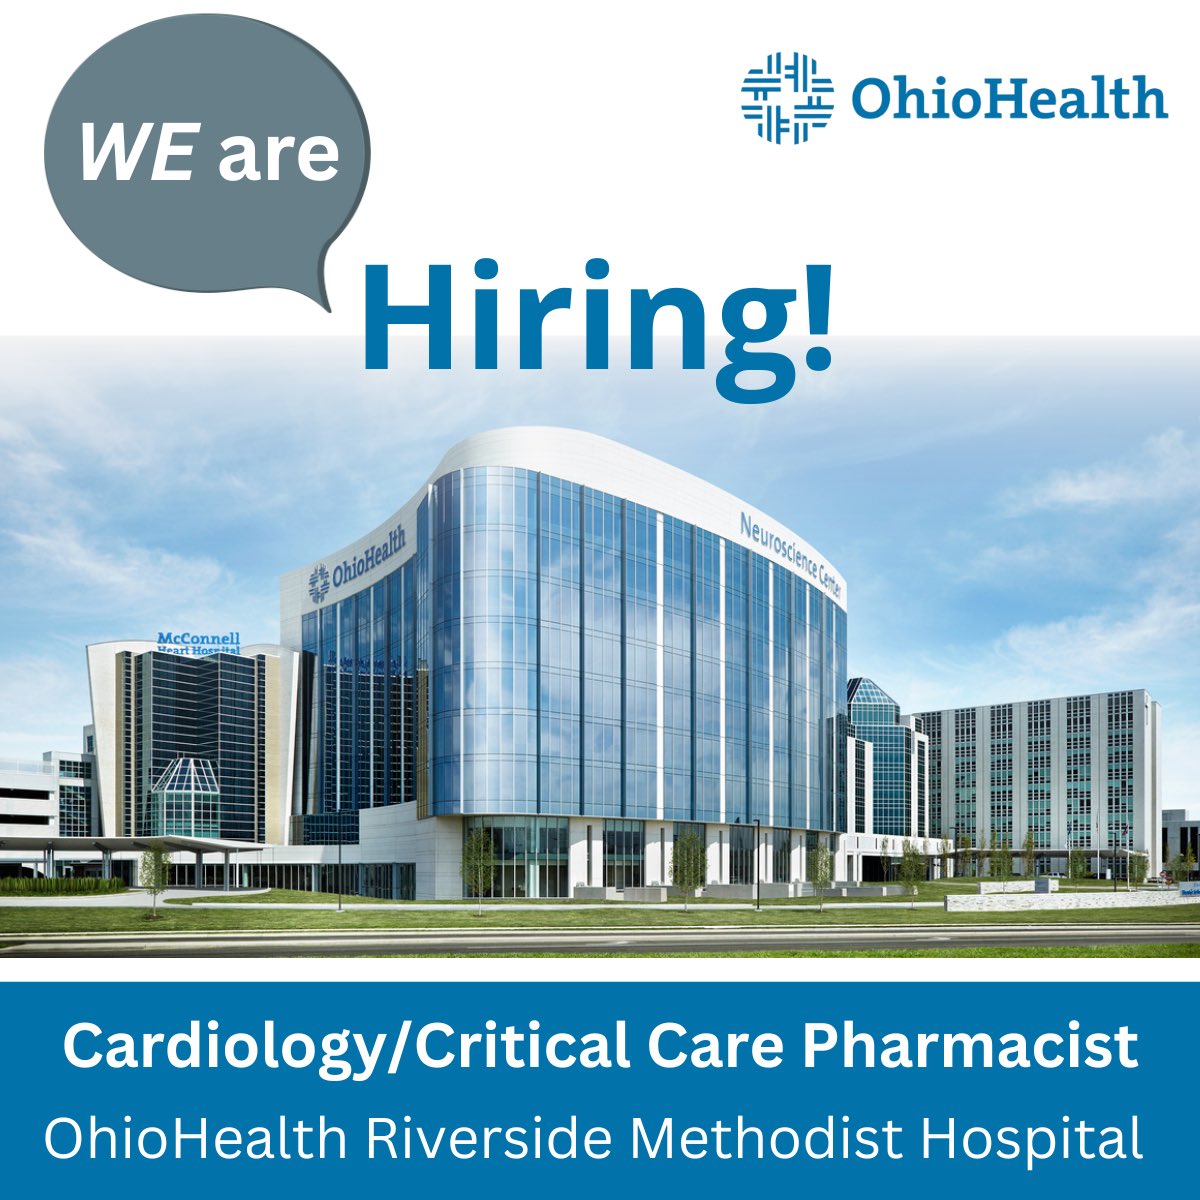 WE are hiring! Job description and application 👉  bit.ly/3nPx4Qk

#TwitteRx please share and DM with any questions about the position. 

#ClinicalPharmacy #Pharmacy #Hiring #OhioHealth